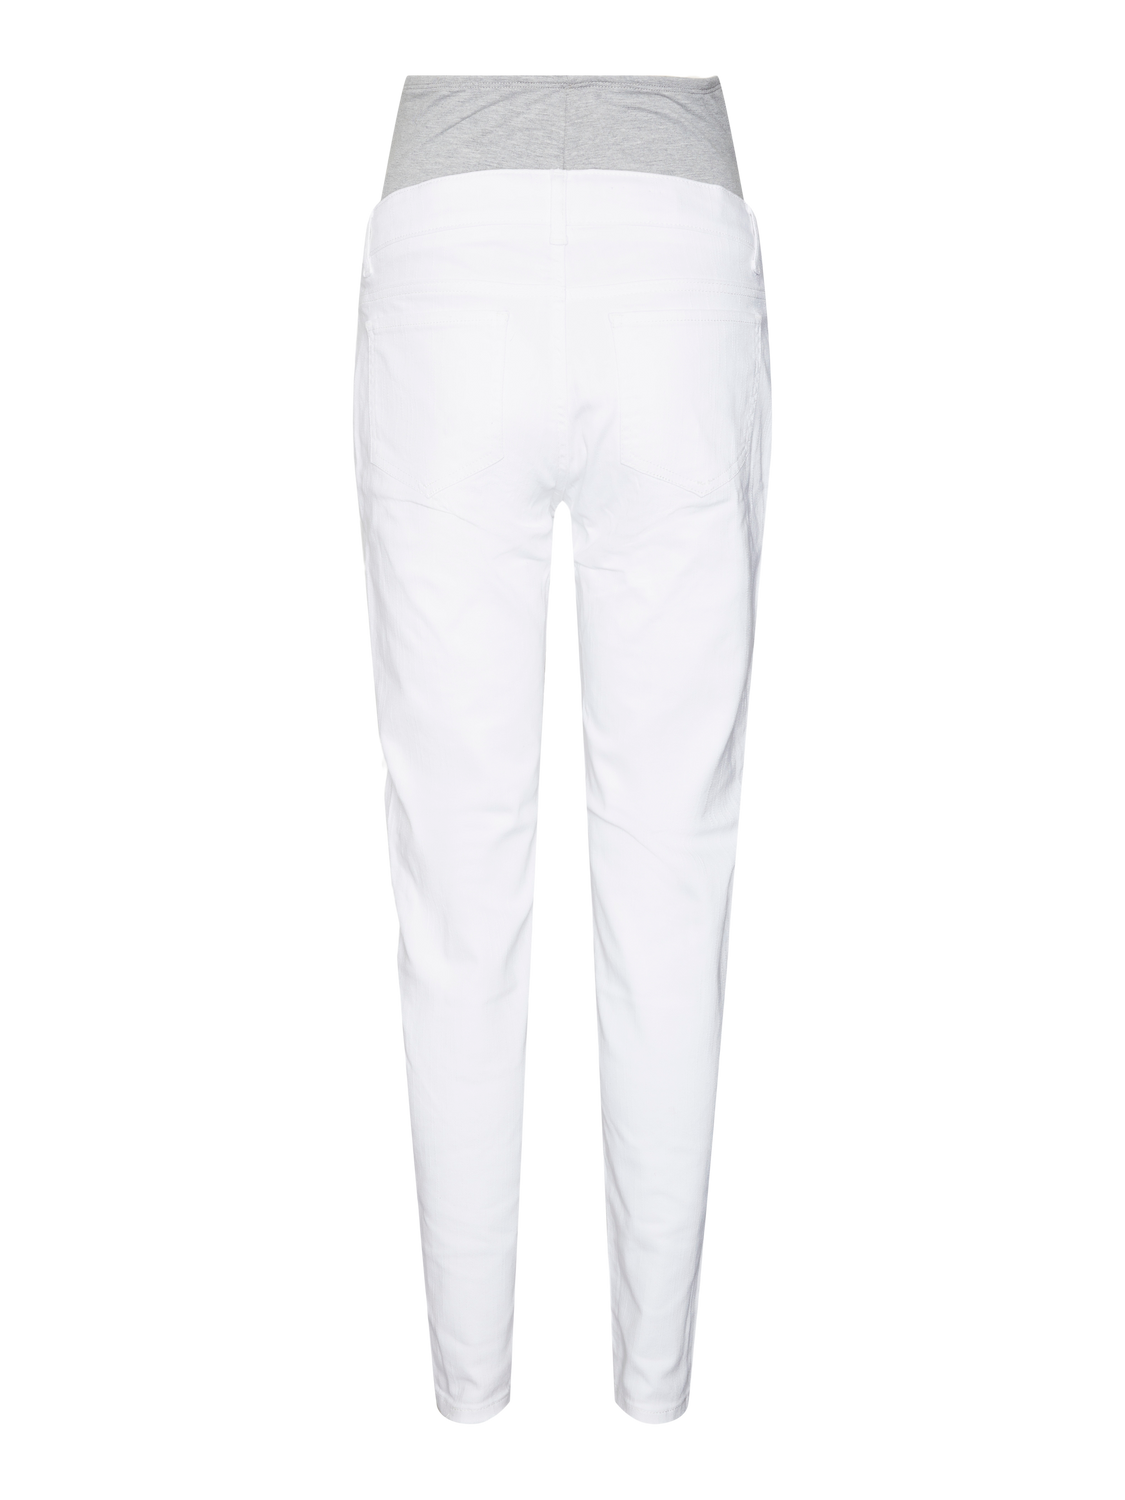 MAMA.LICIOUS Jeans Slim Fit Taille moyenne -Antique White - 20020025